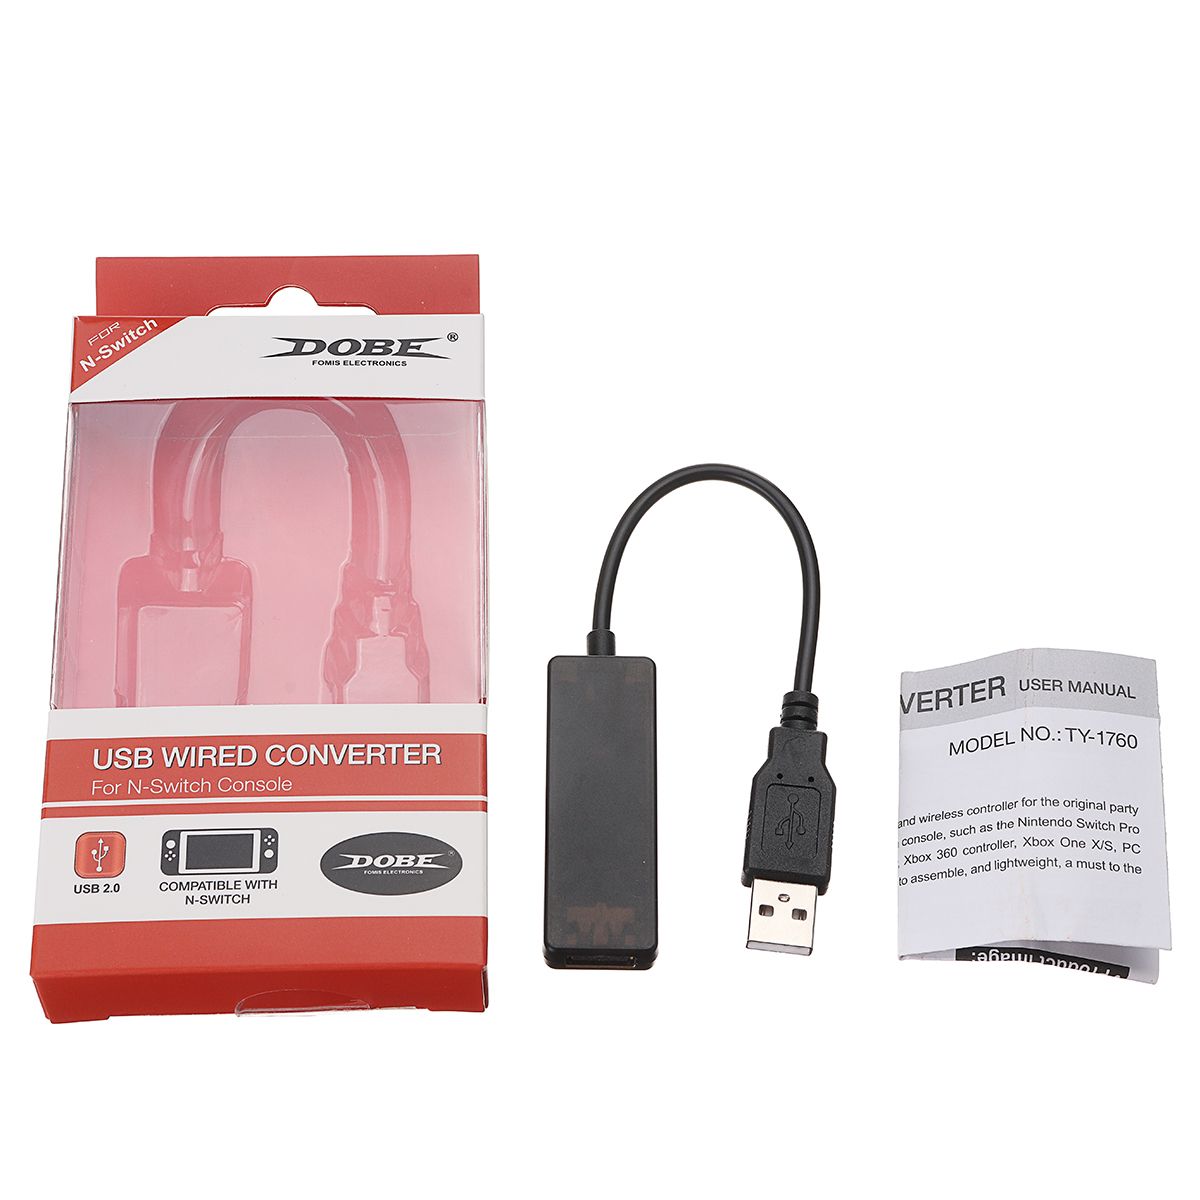 DOBE-TY-1760-bluetooth-USB-Wired-Converter-for-N-Switch-Console-Handle-Gamepad-Connector-1306060